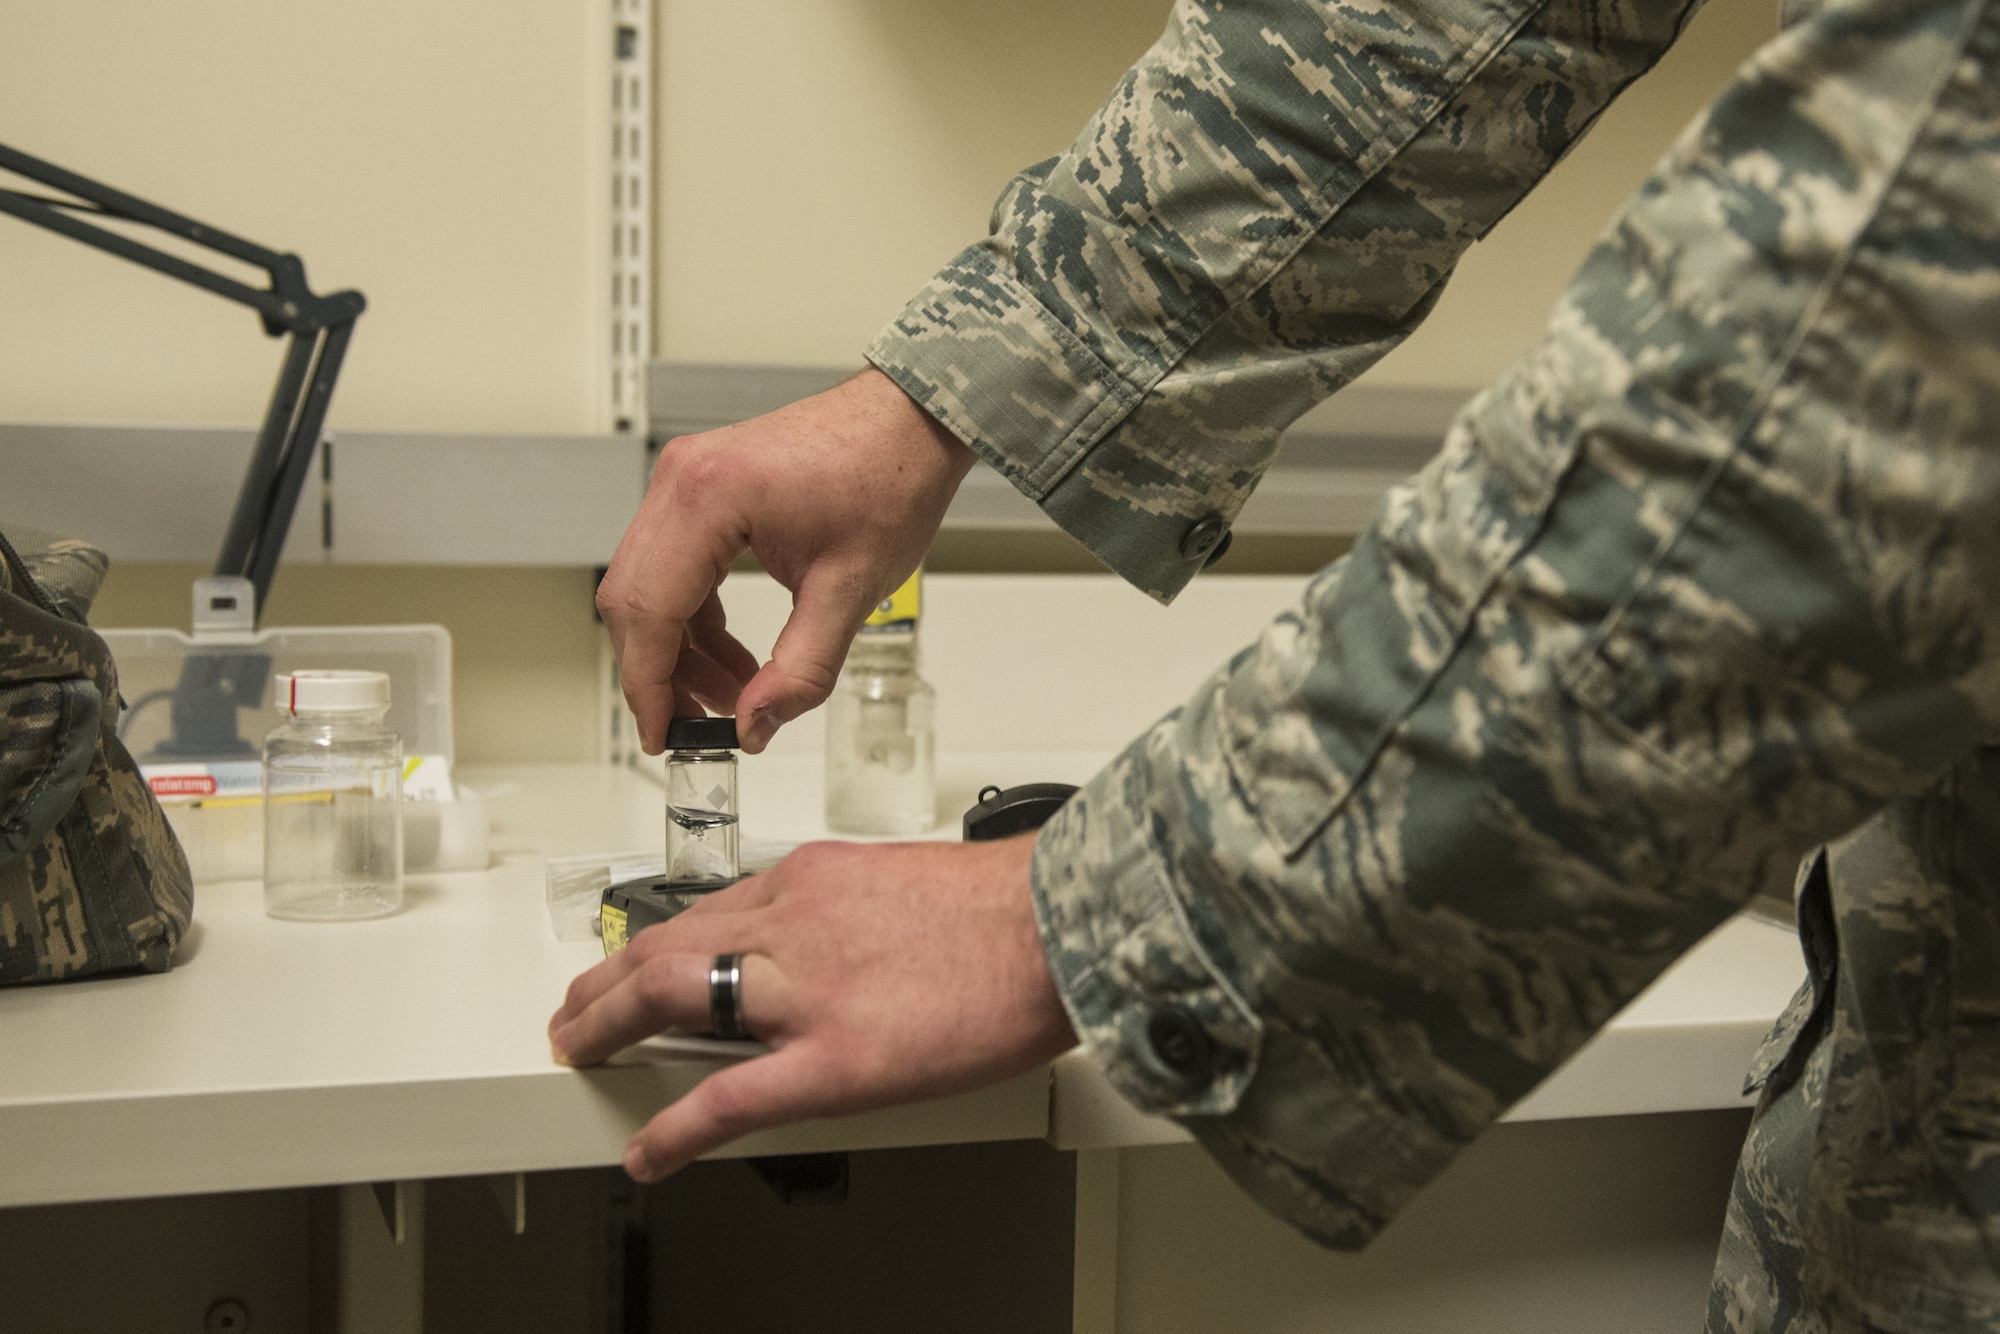 U.S. Air Force Airman 1st Class Jackson Gordon, 20th Aerospace Medicine Squadron bioenvironmental apprentice, places a vial of water into a pocket colorimeter, which measures chlorine, at Shaw Air Force Base, S.C., Jan. 12, 2018.